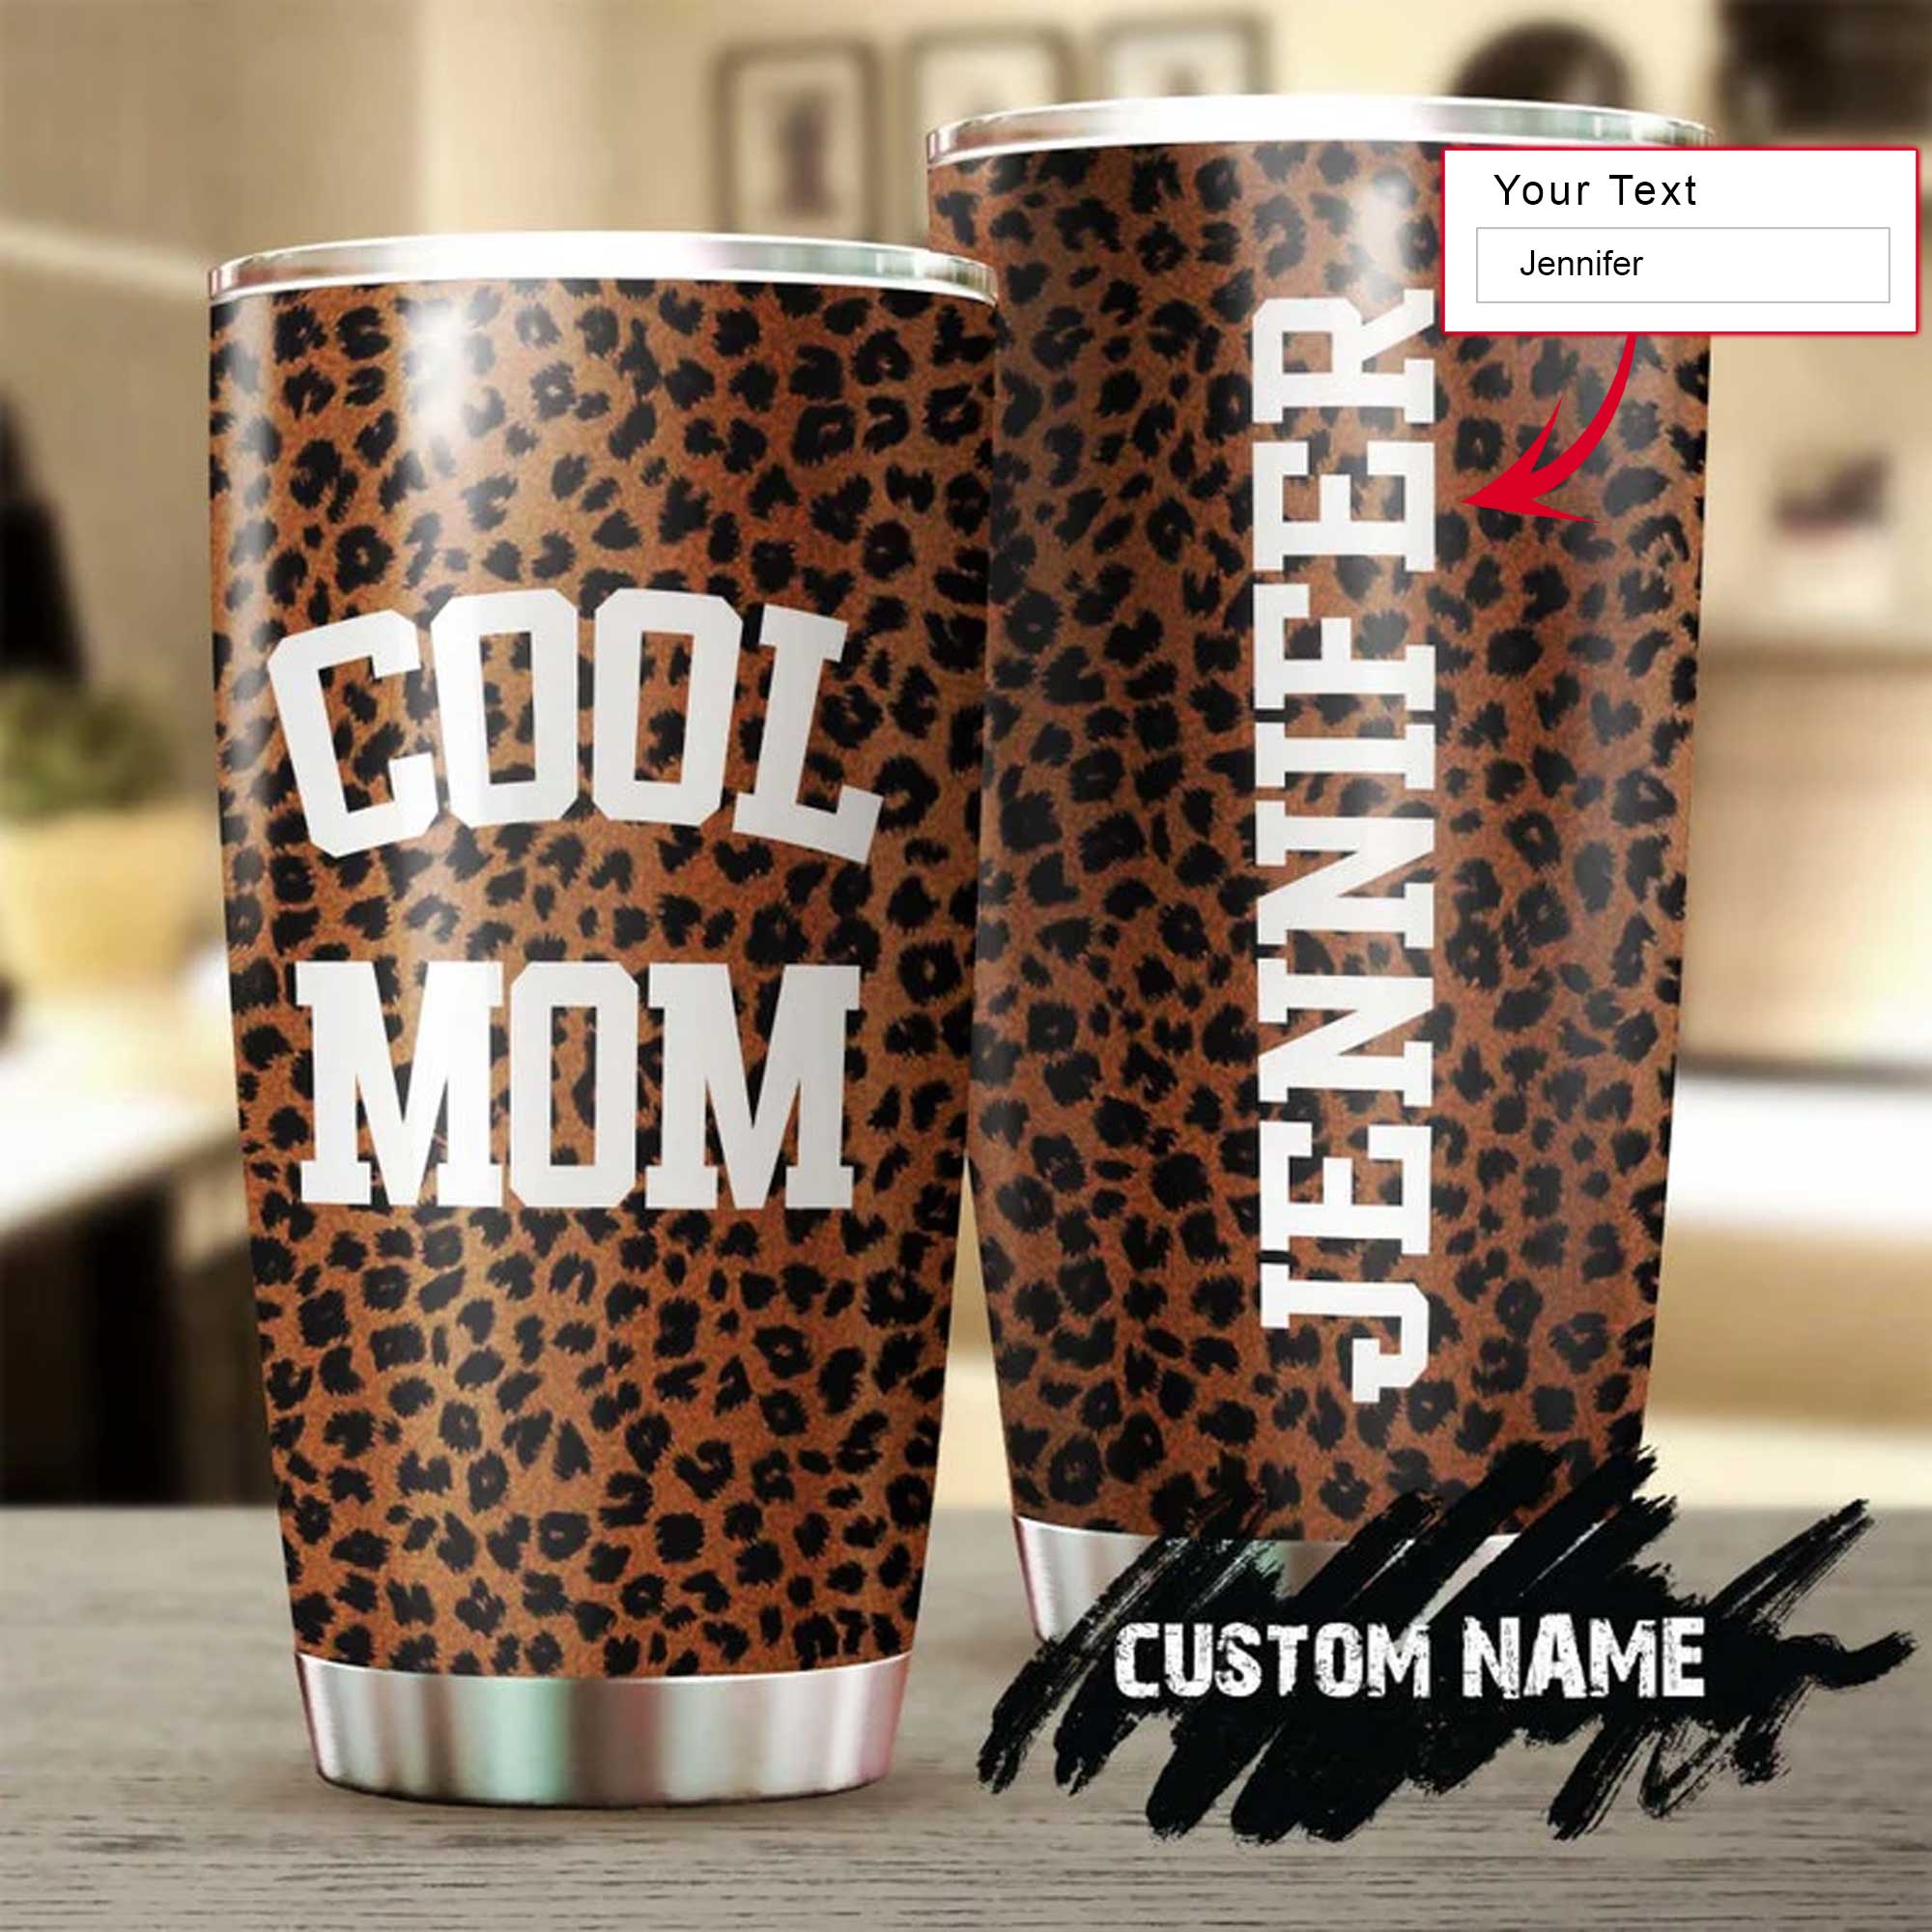 Personalized Mother's Day Gift Tumbler - Custom Gift For Mother's Day, Presents for Mom - Cool Mom, Leopard Pattern Tumbler